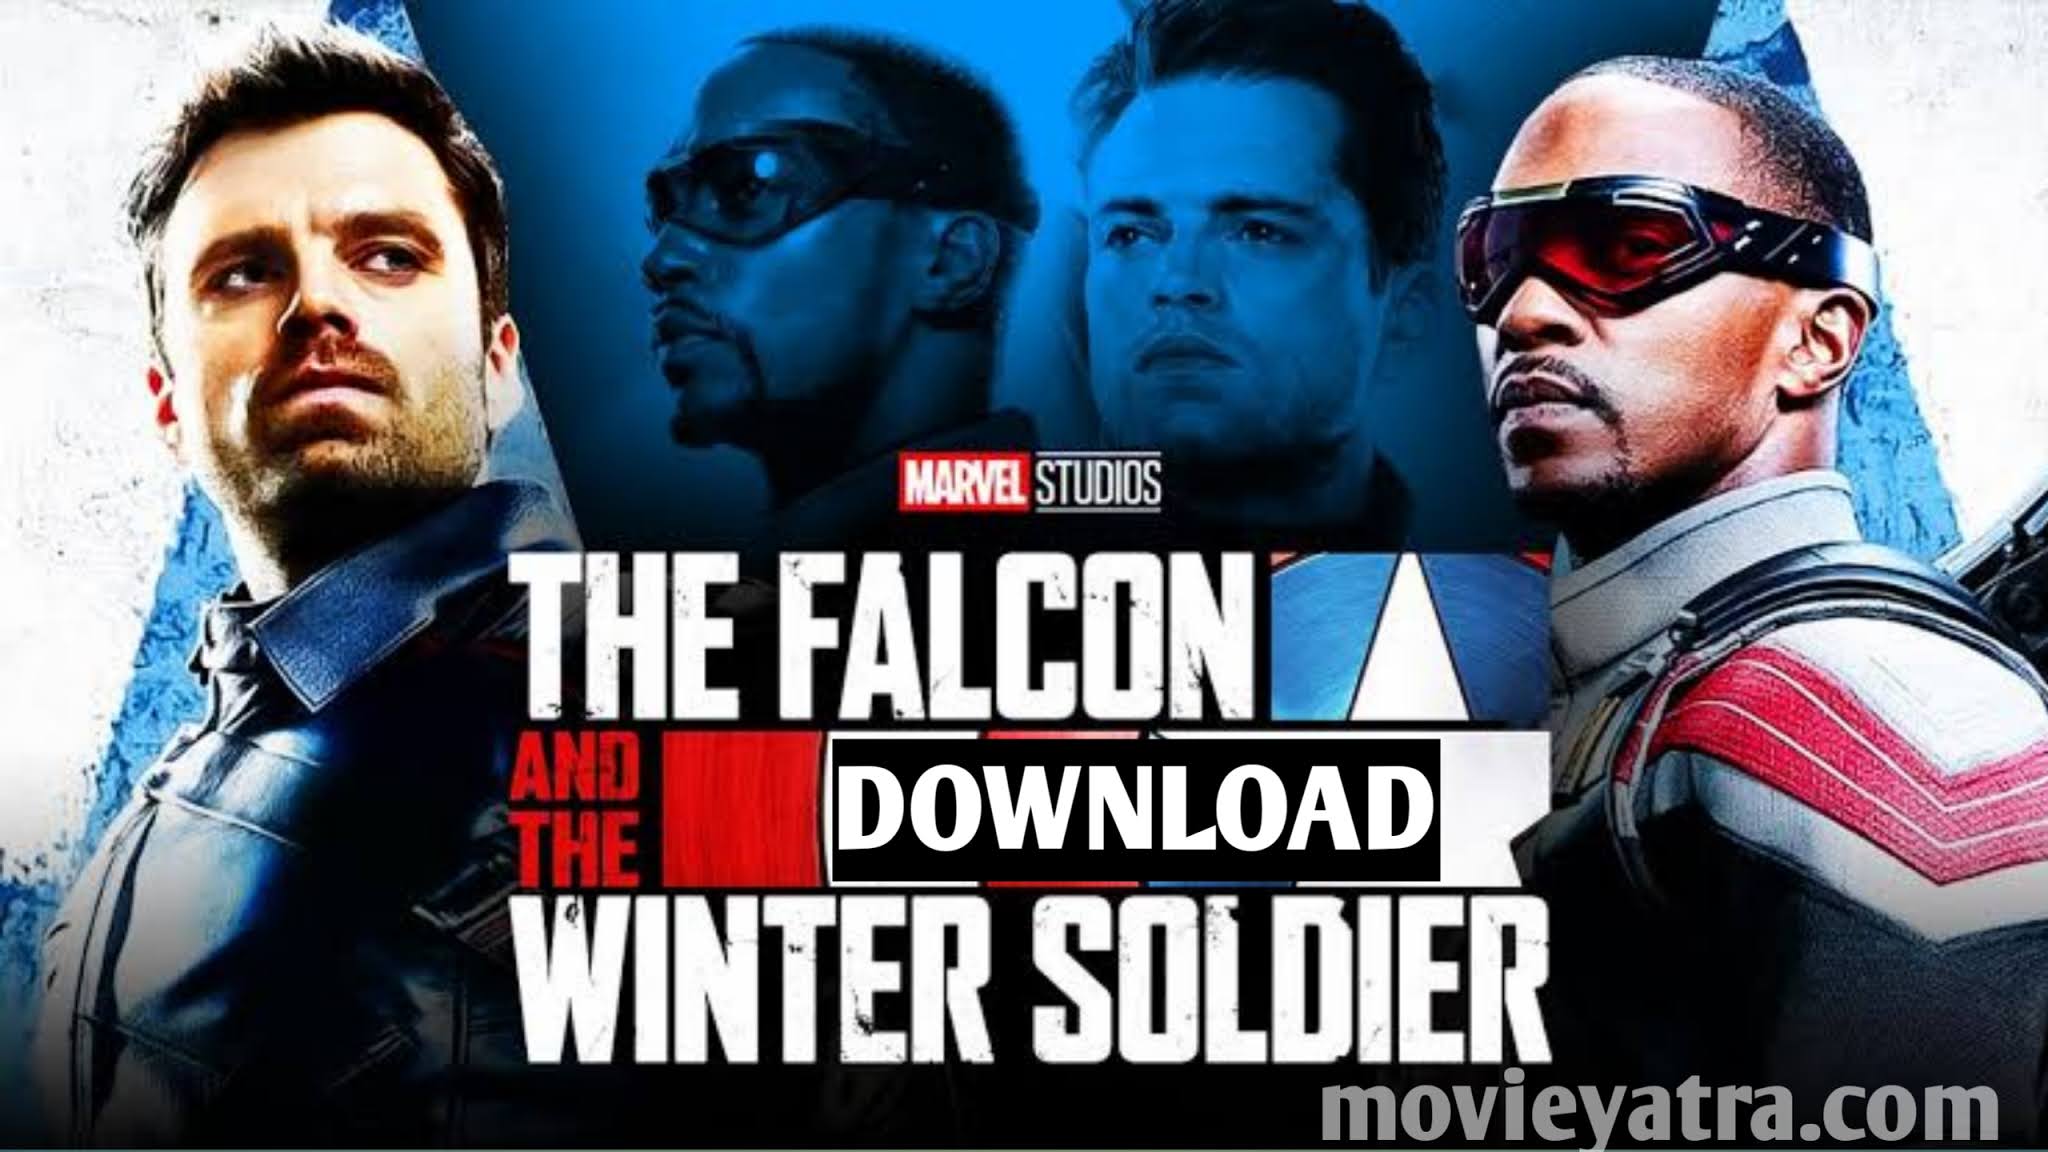 The Falcon and the Winter Soldier all episodes Download free | The Falcon and the Winter Soldier full review and full story explanation in hindi language